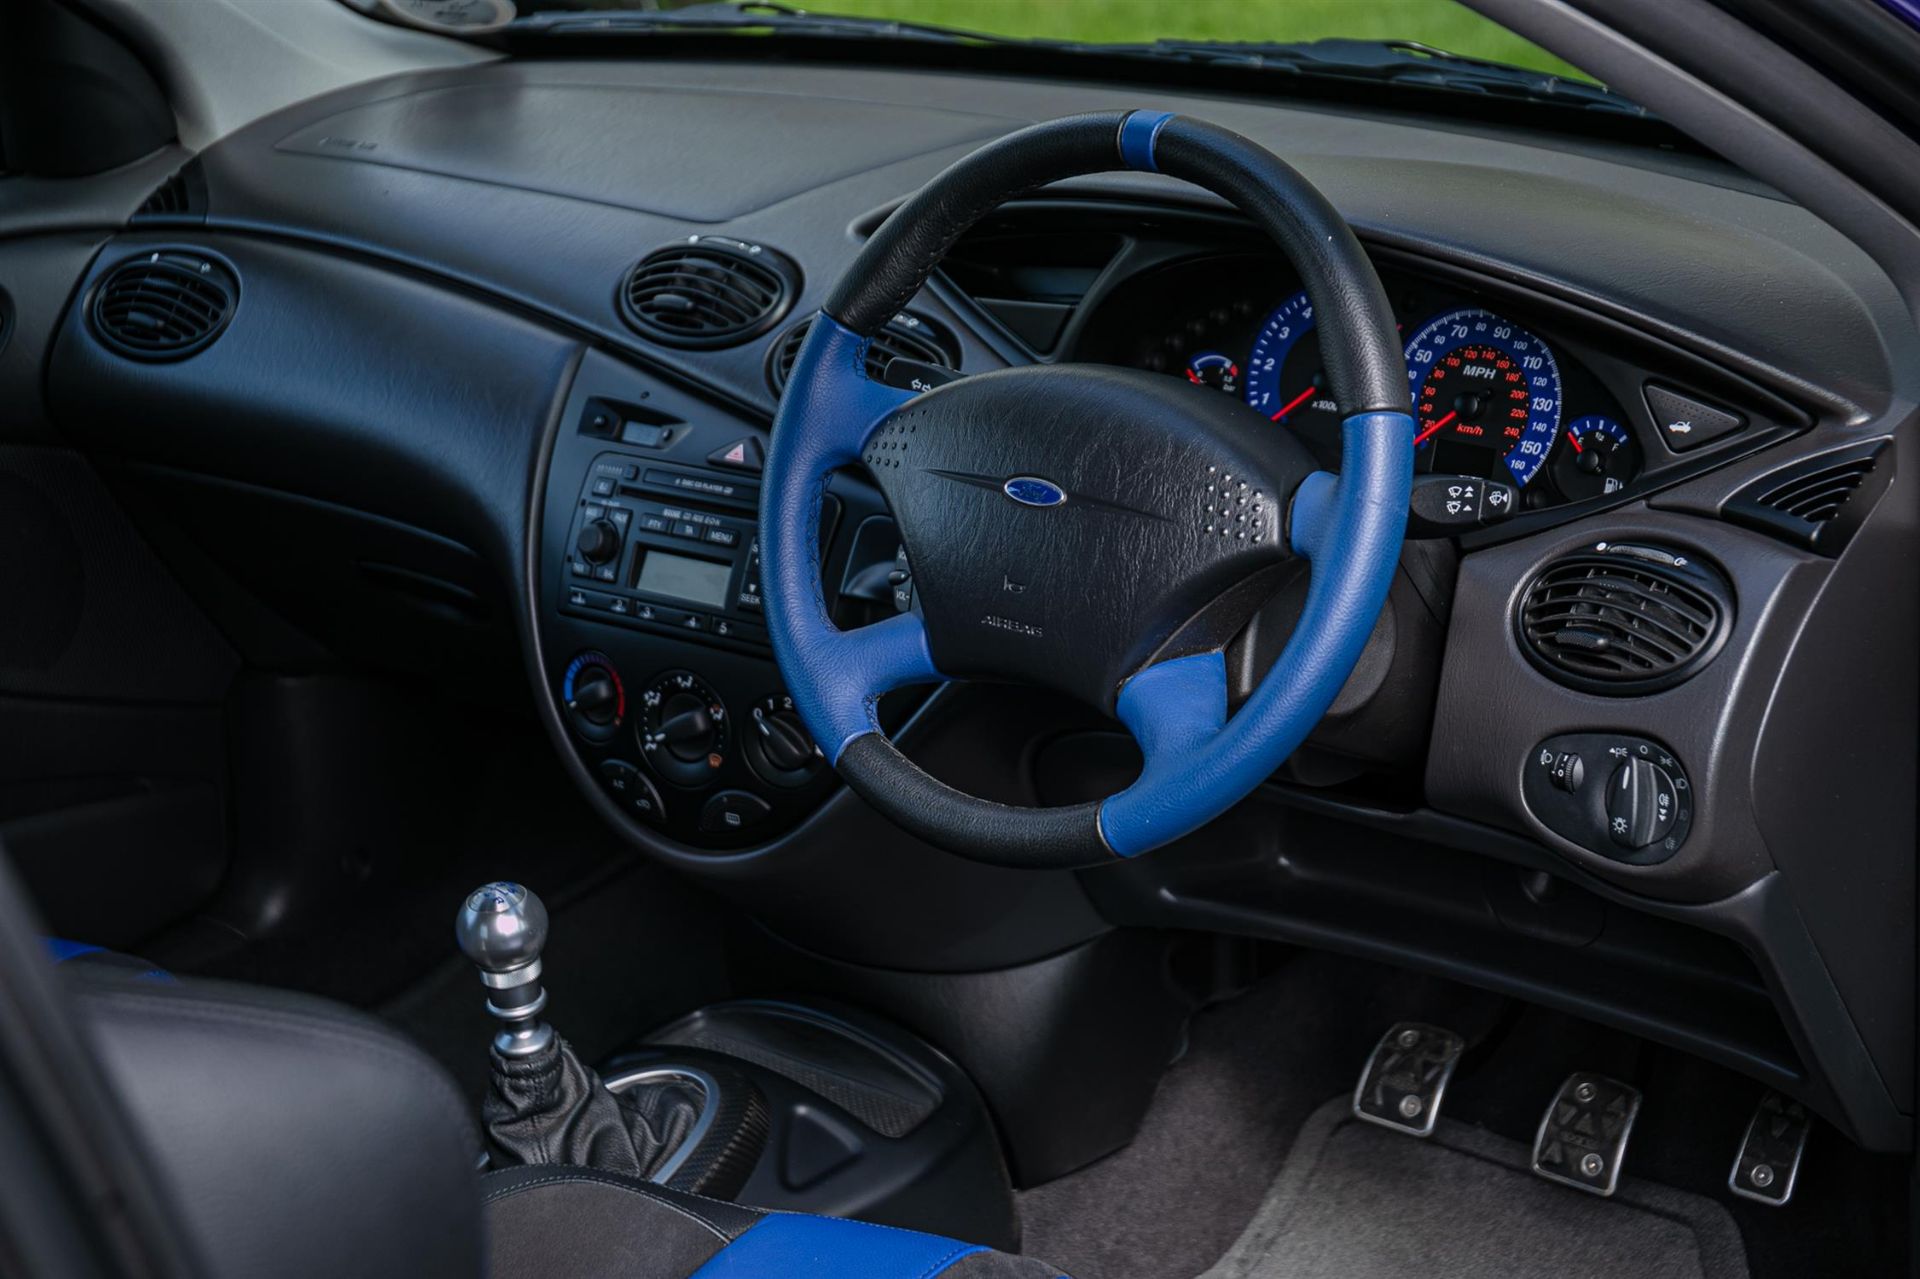 2003 Ford Focus RS Mk1 - 3265 Miles - Image 2 of 10